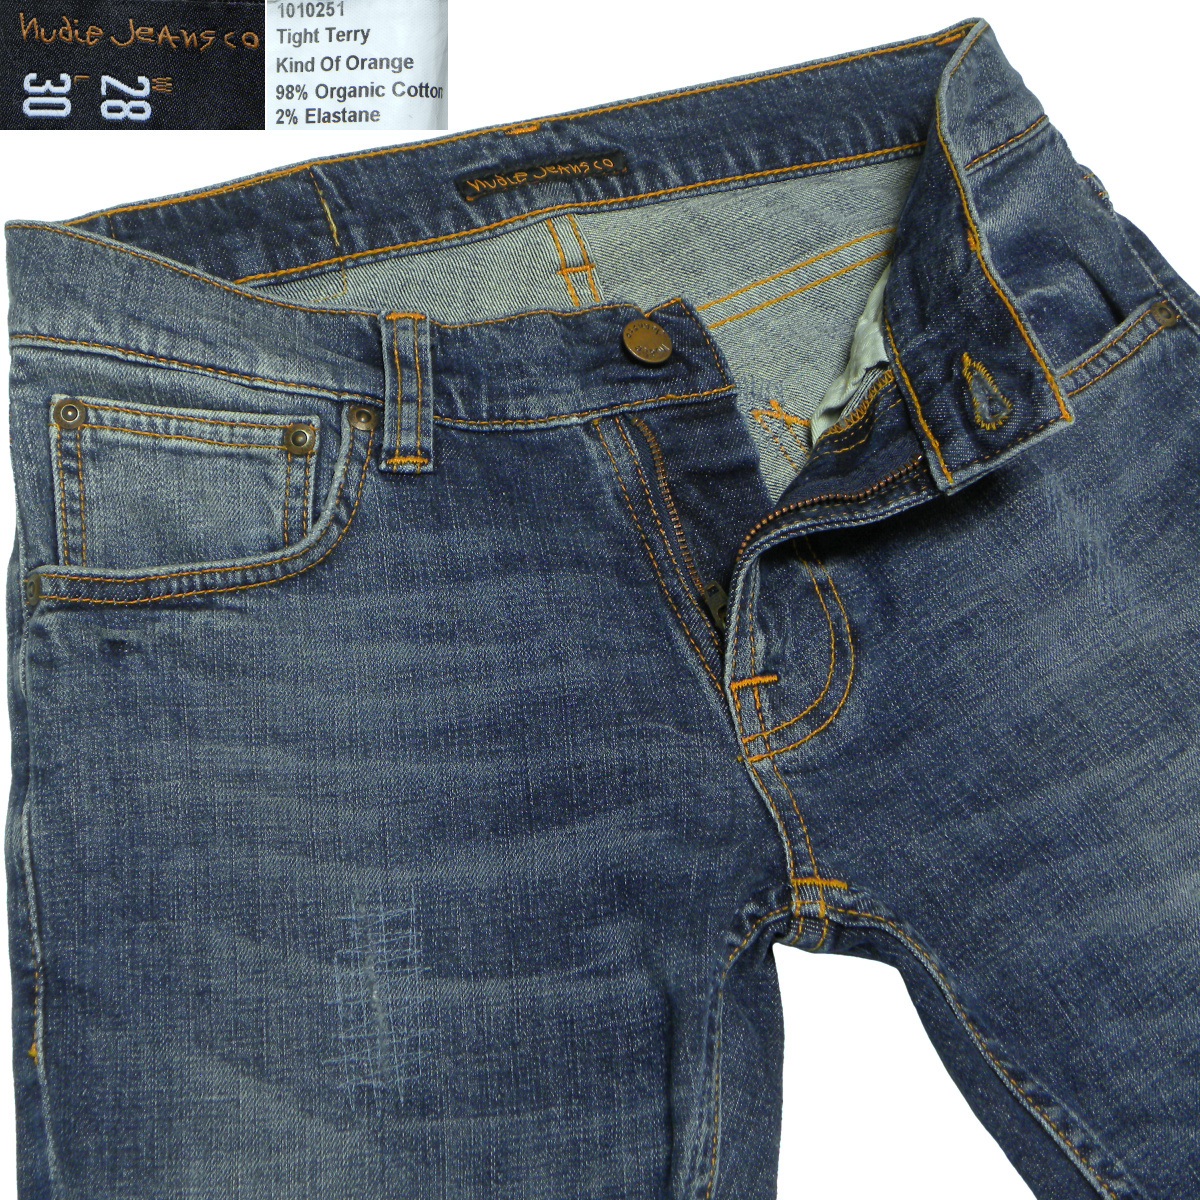 Nudie Jeans 1010251 Tight Terry W28 スキニースリムデニムパンツ 軽ダメージリペア加工 ヌーディージーンズ_画像2